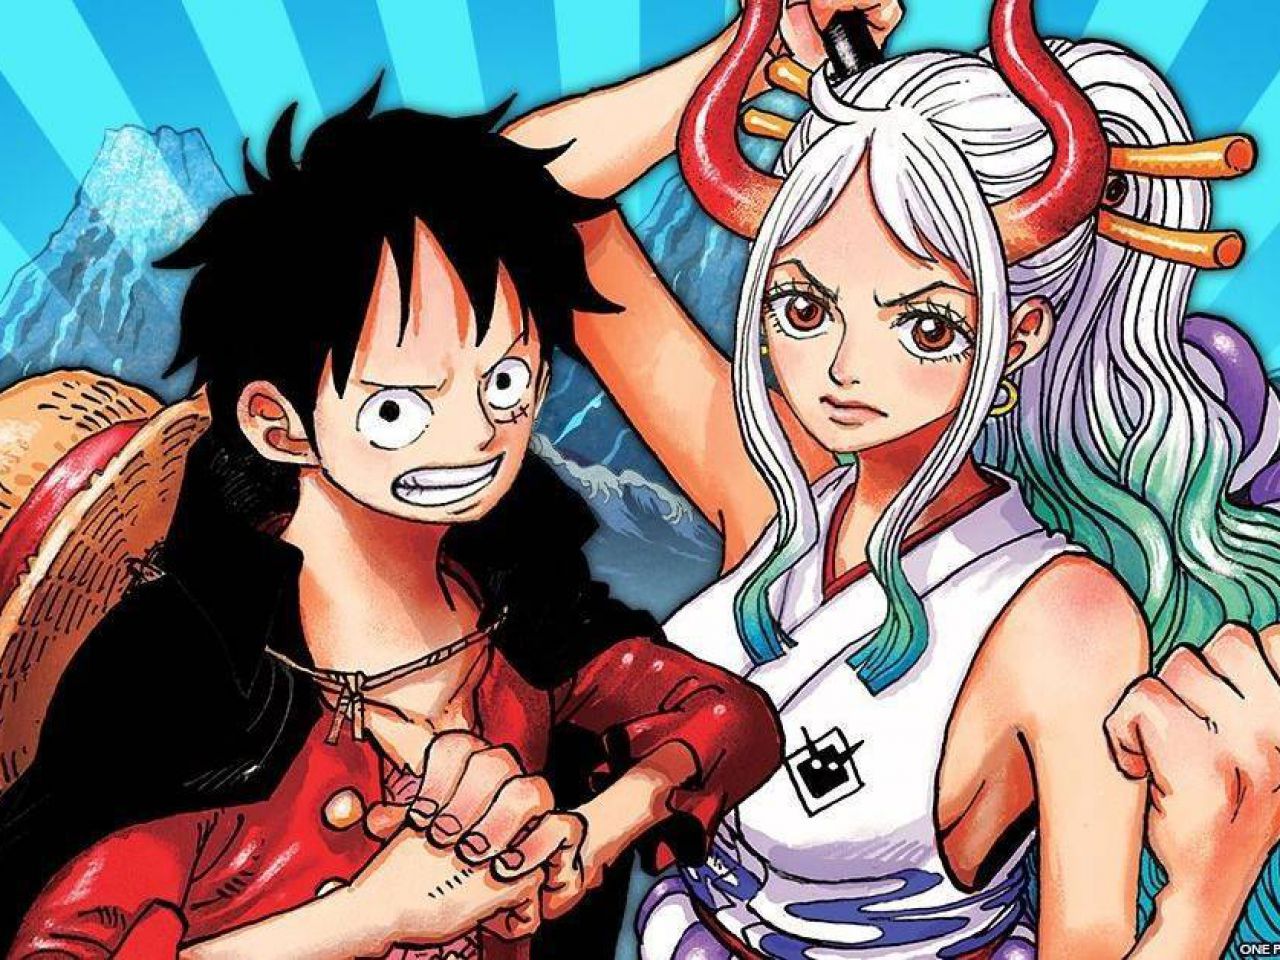 ONE PIECE: A fan art from Yamato conquers fans of the manga by Eiichiro